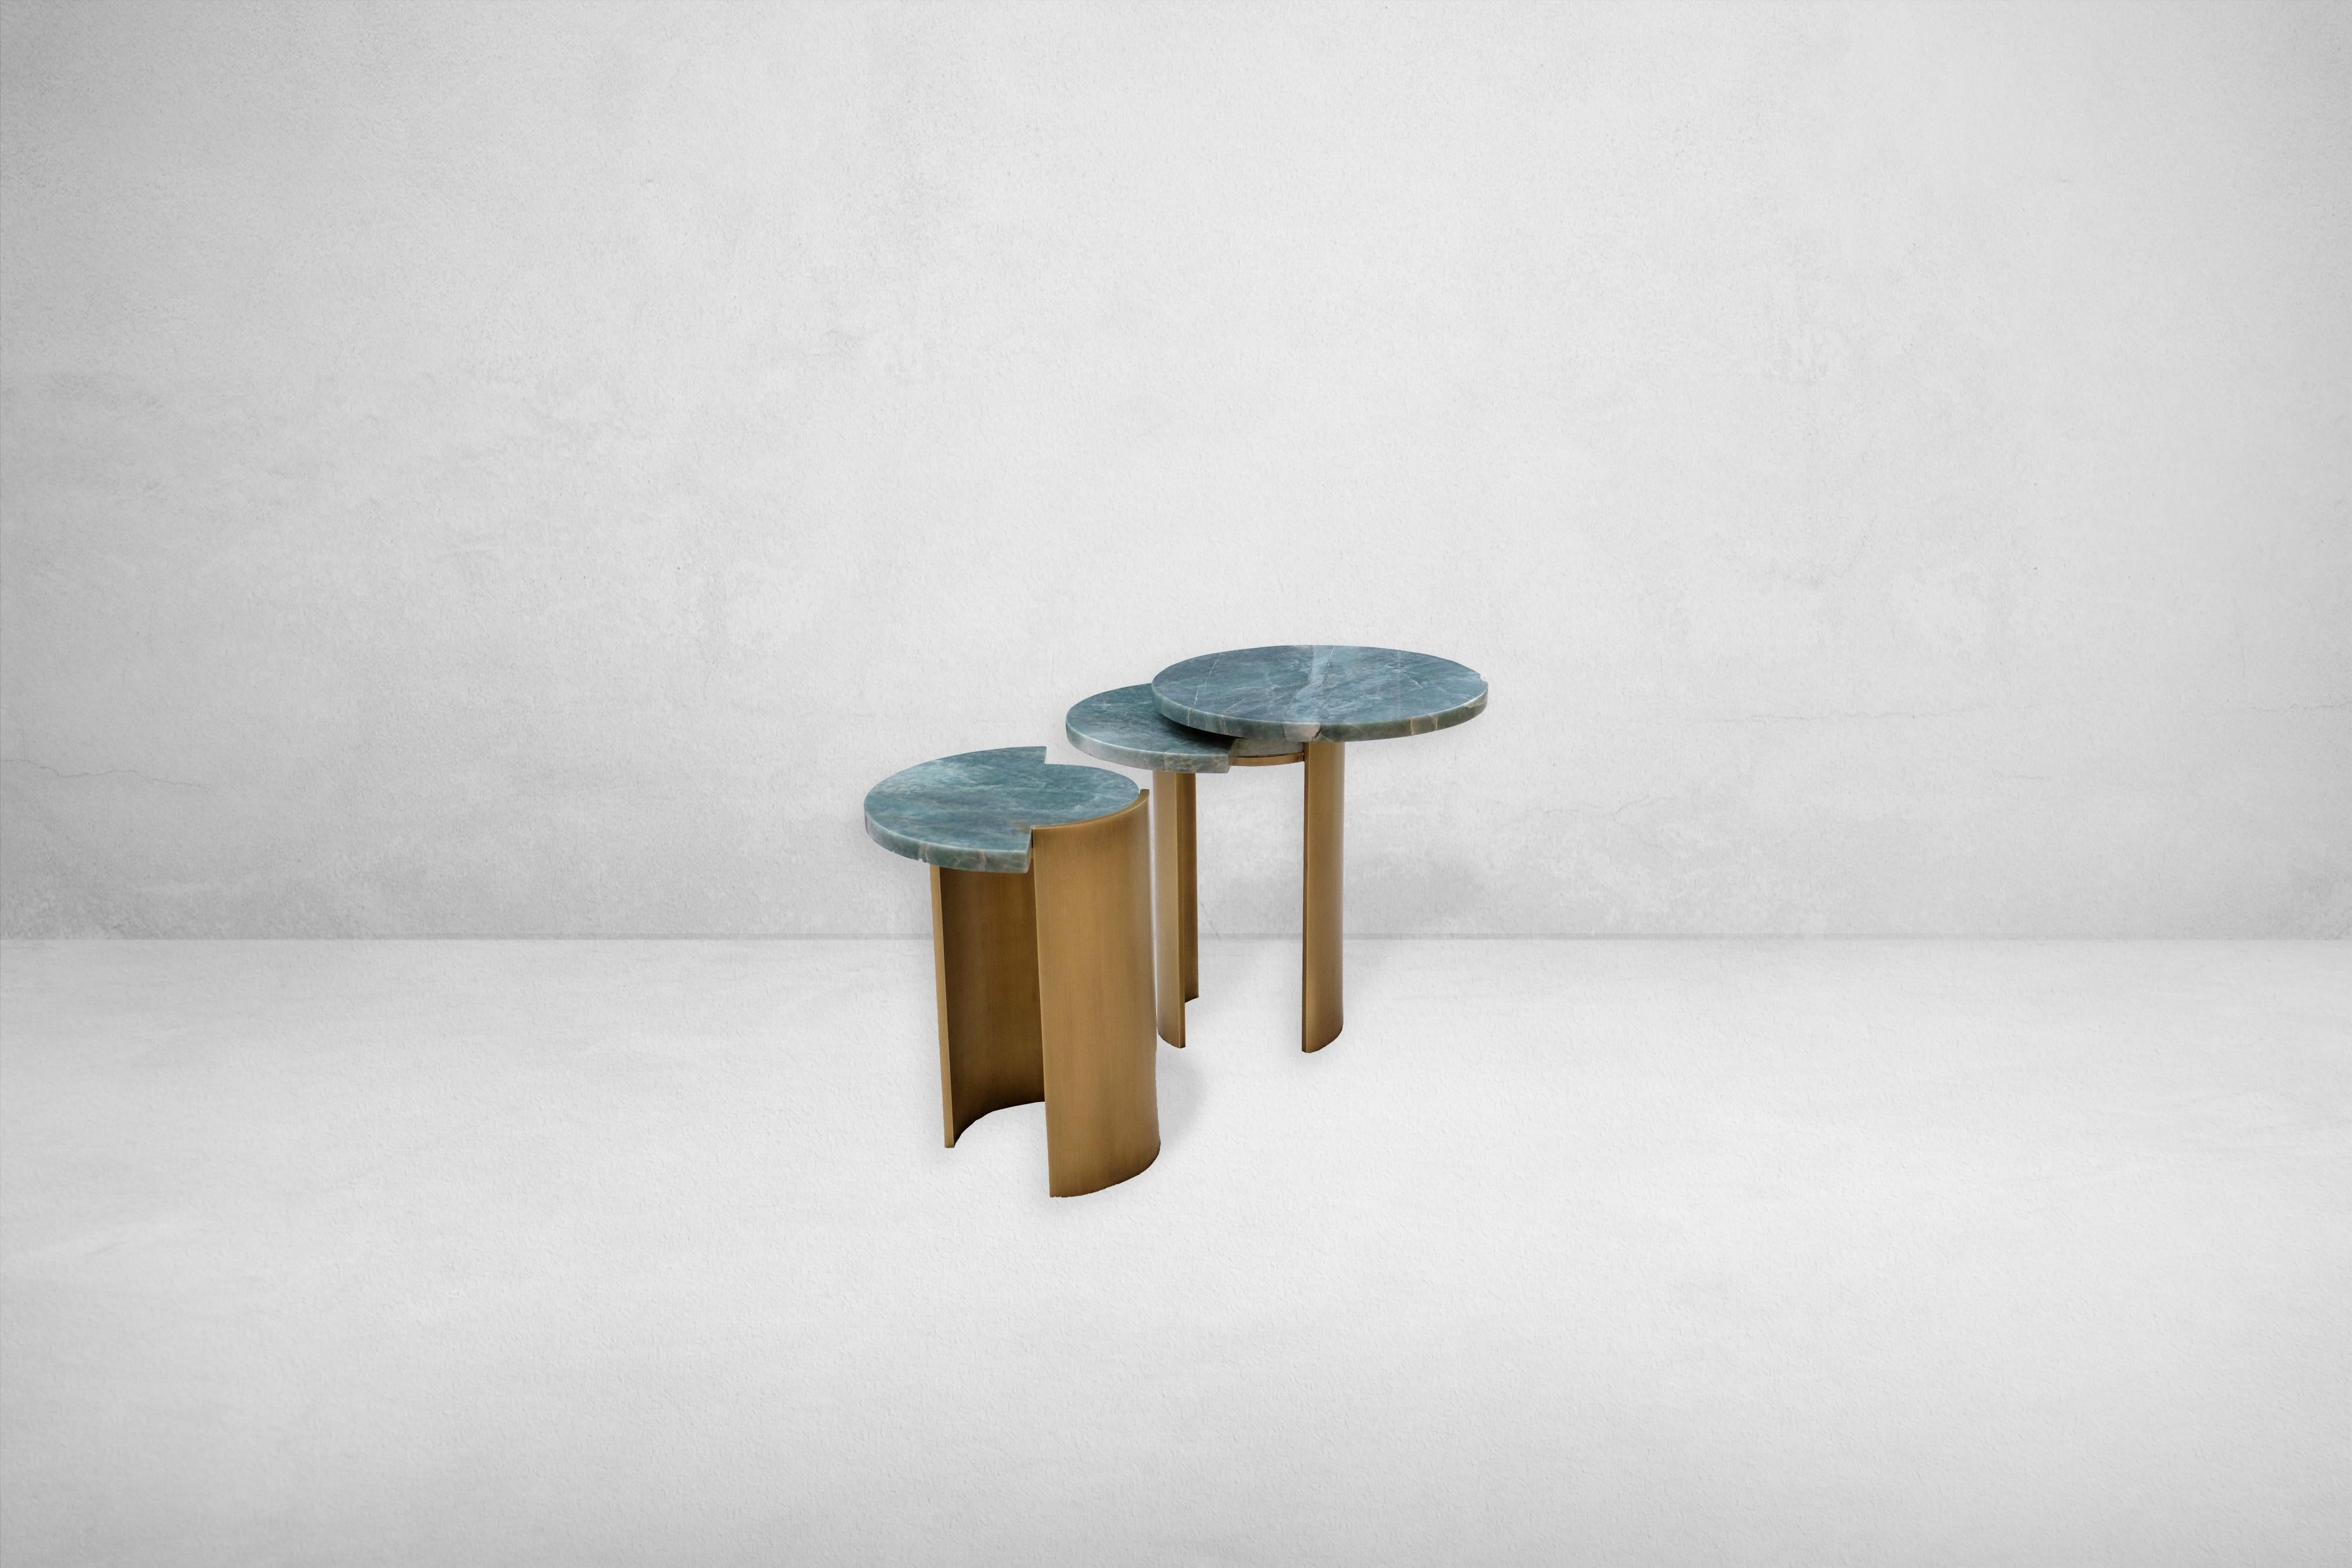 Symbol Emerald side table by Atra Design.
Limited Edition of 8.
Dimensions: D 36 x H 37 cm.
Materials: emerald quartzite, brass.
Available in other size.

Atra Design
We are Atra, a furniture brand produced by Atra form a mexico city–based